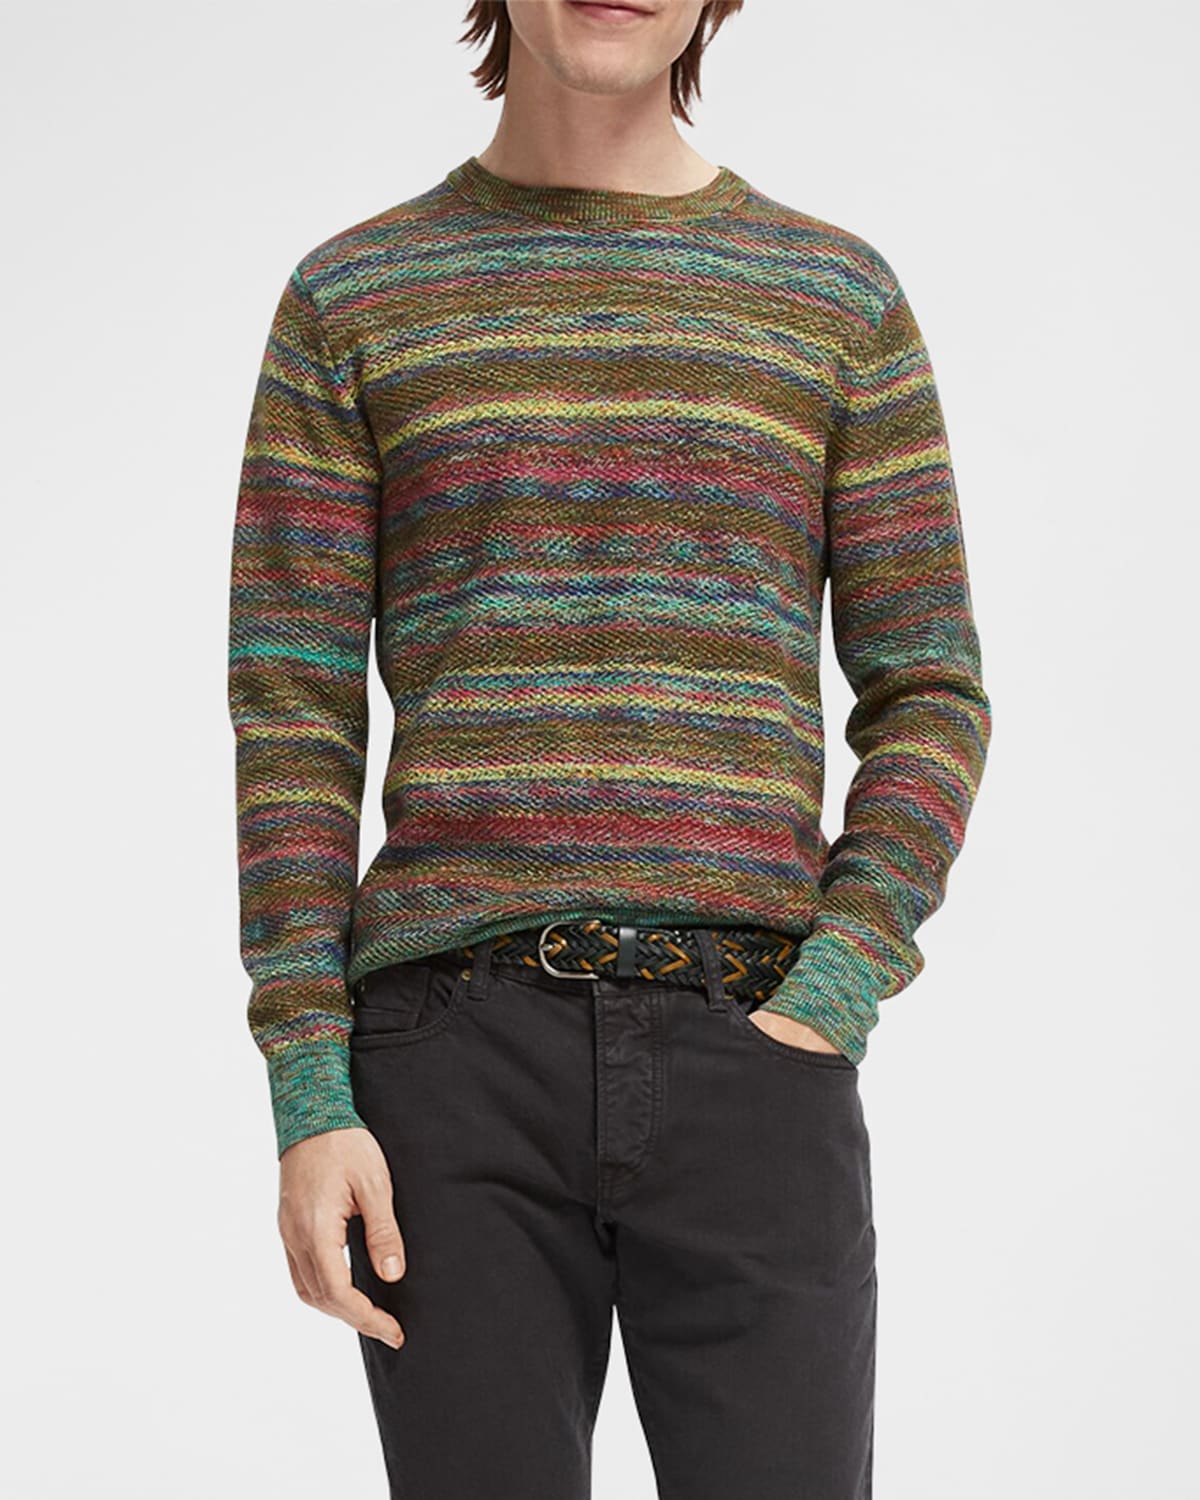 Men's Structured Space-Dyed Sweater